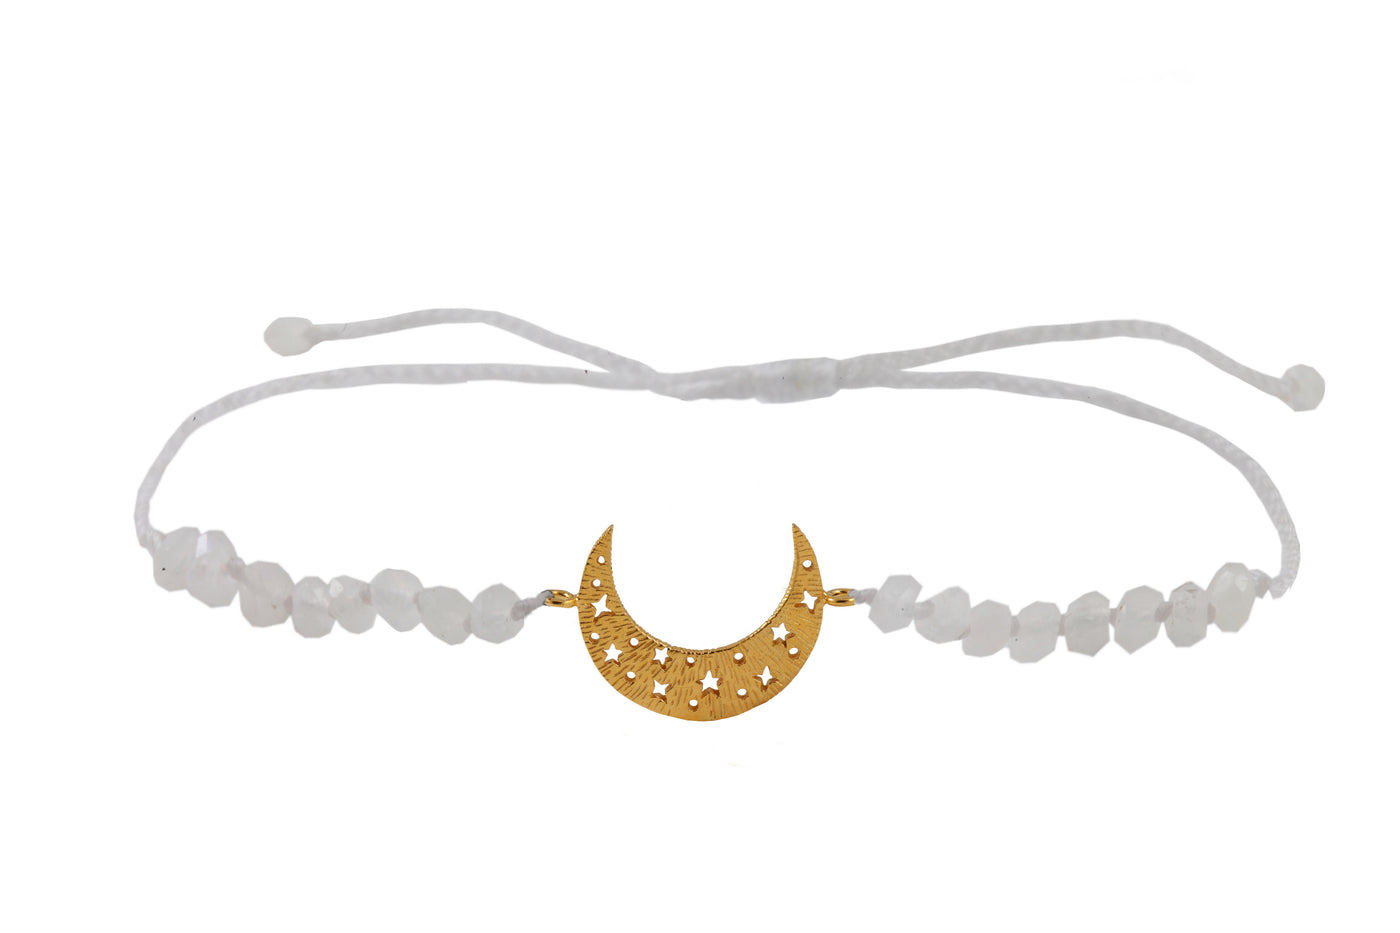 Moon amulet bracelet with beads. Gold plated